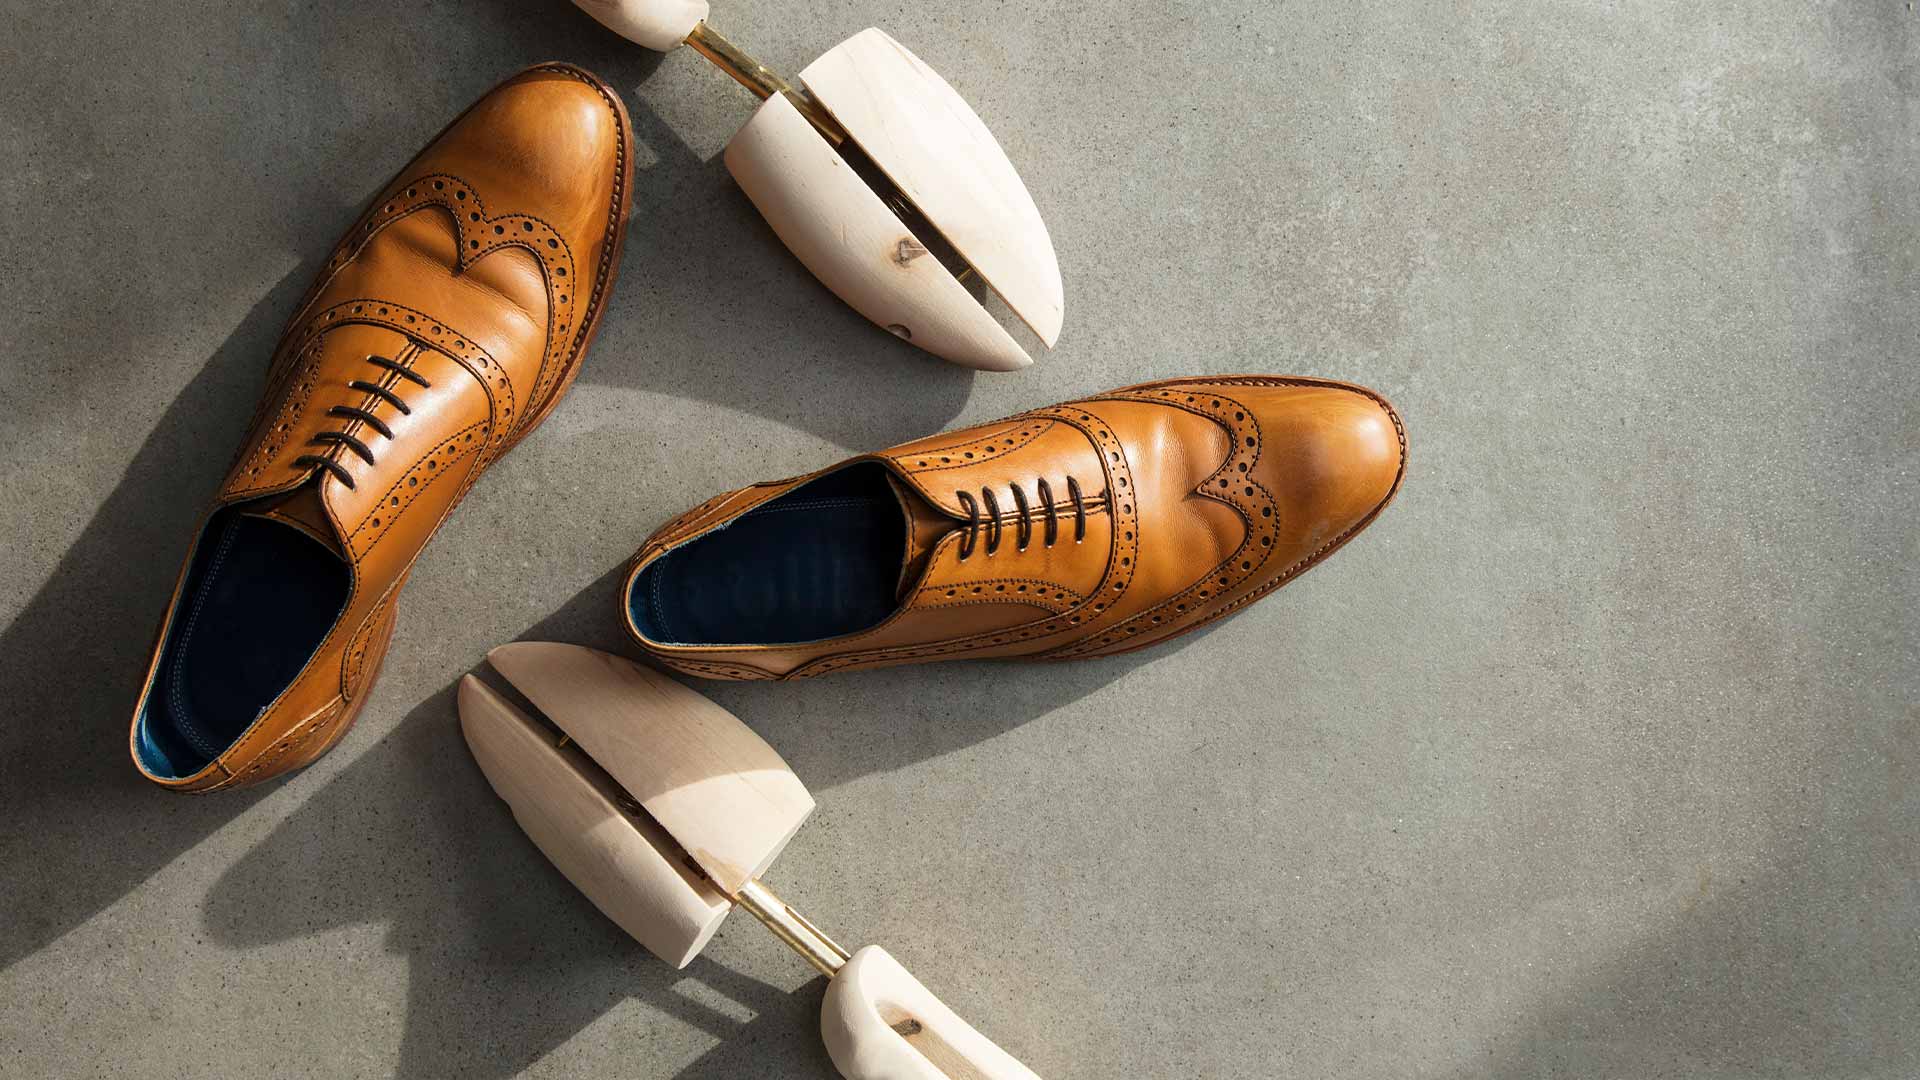 Shoe tree and a pair of men's brown leather shoes from top shoe brand in Singapore